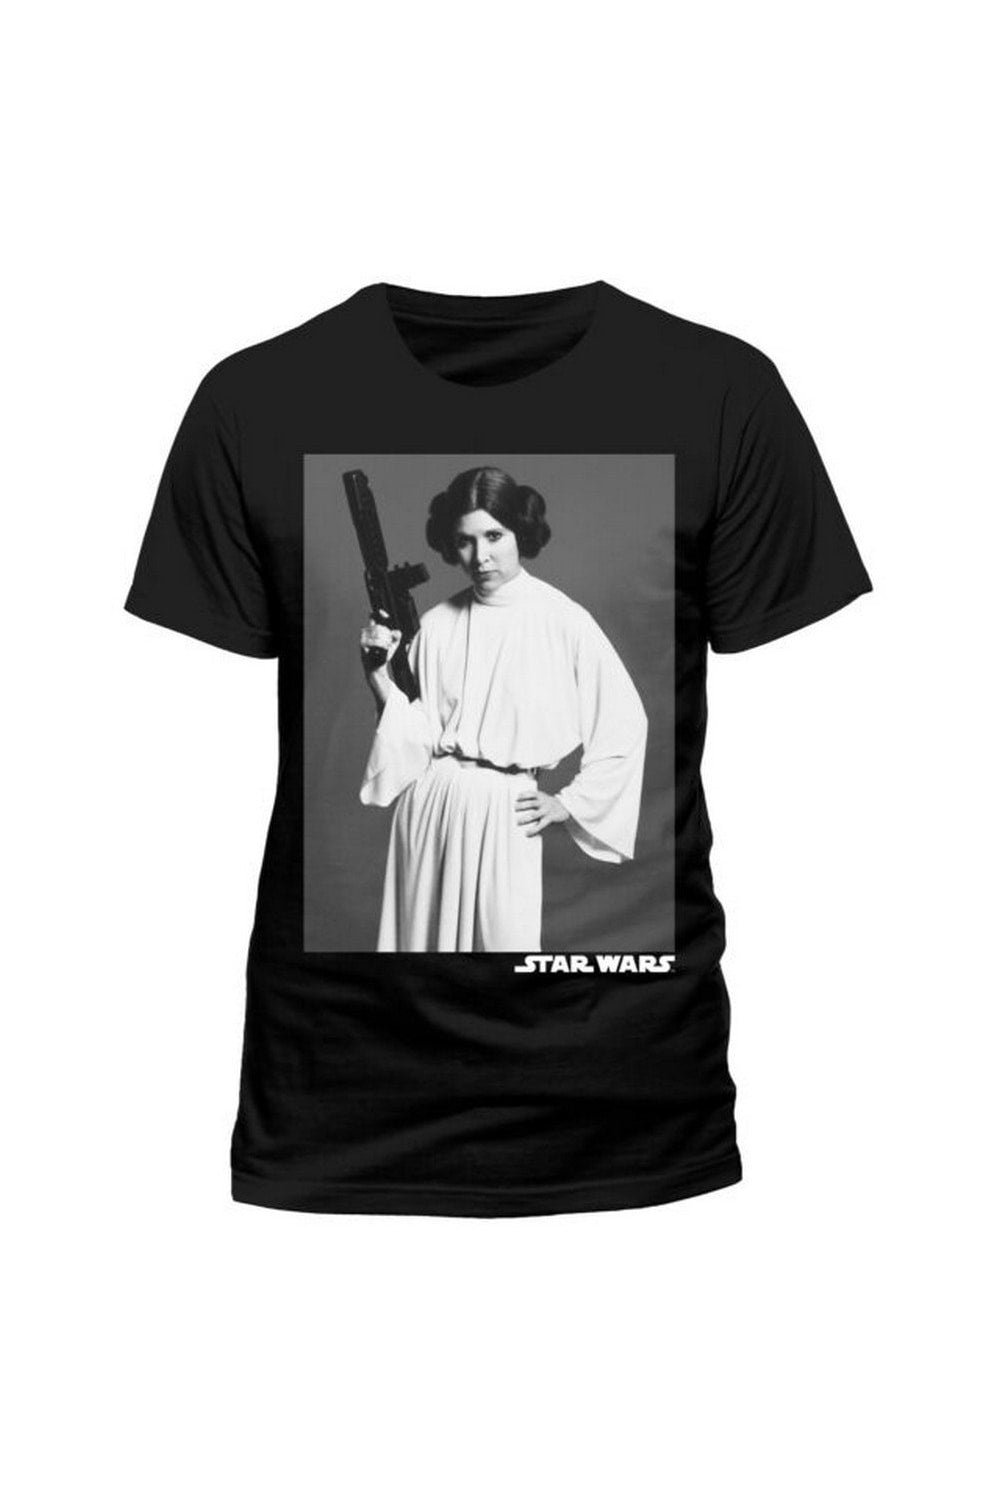 Star Wars Unisex Adults T-shirt With Classic Leia Portrait Design